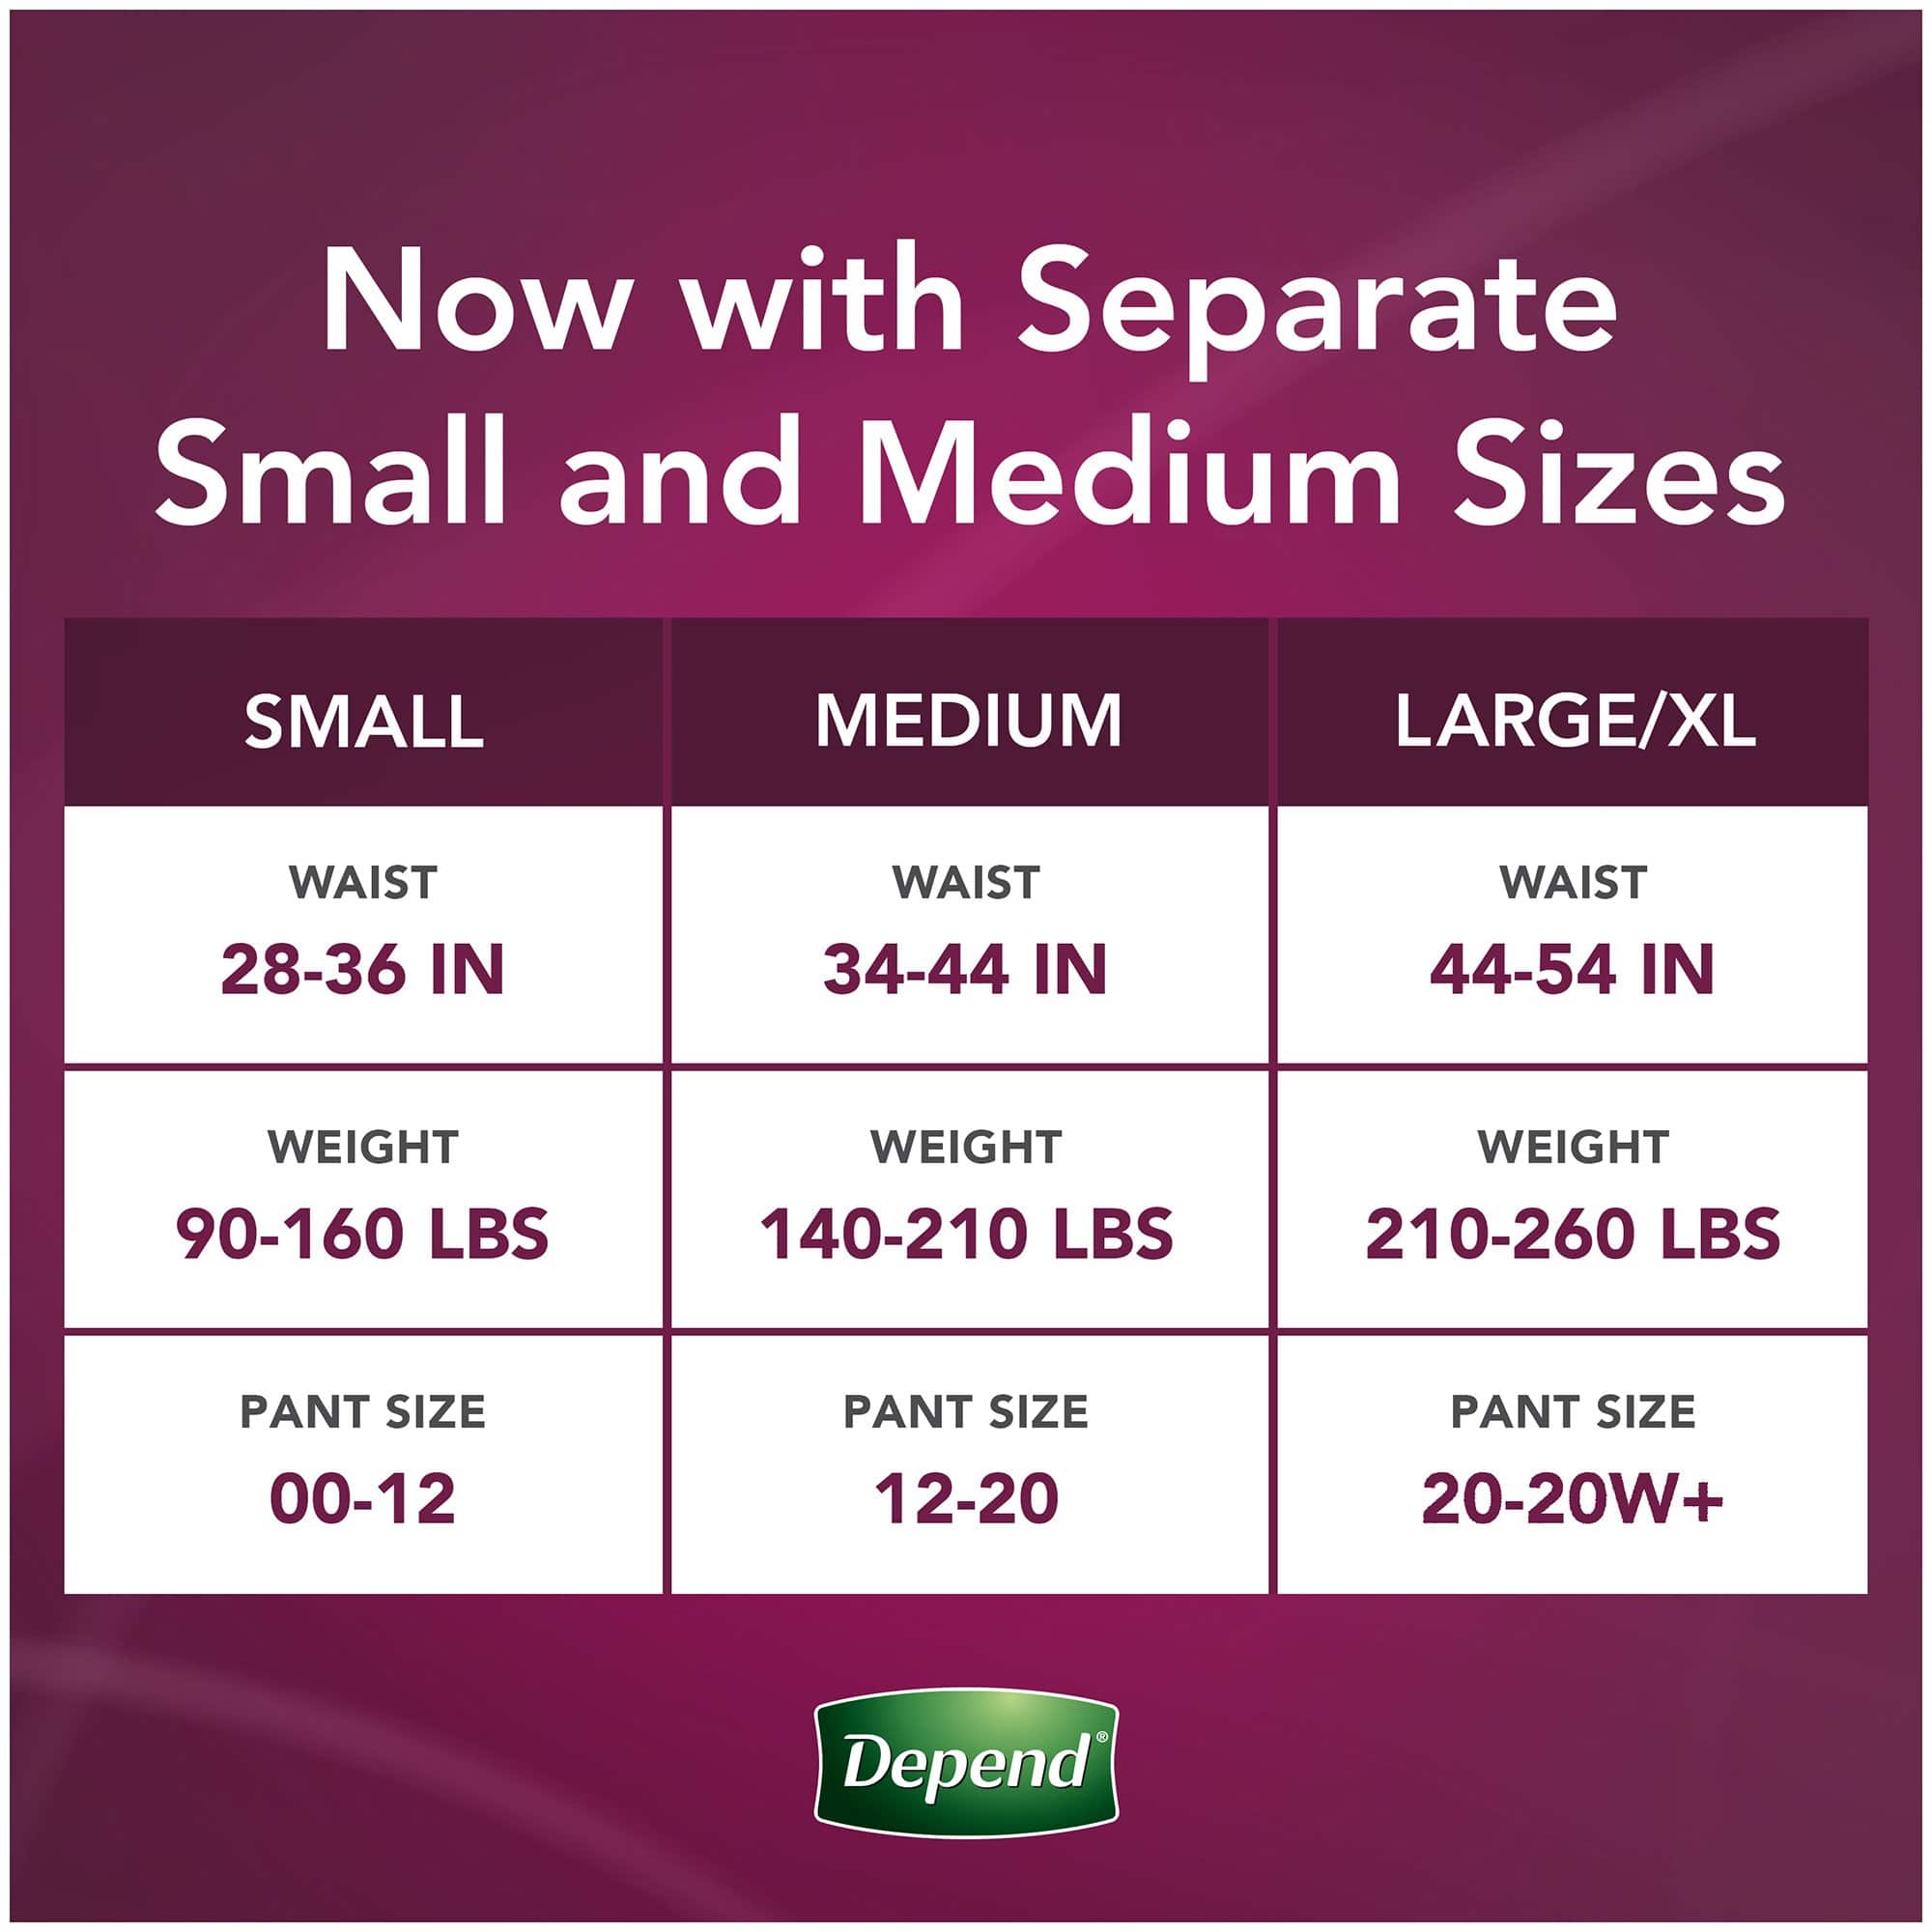 Depend Silhouette Maximum Absorbent Underwear, Large / Extra Large